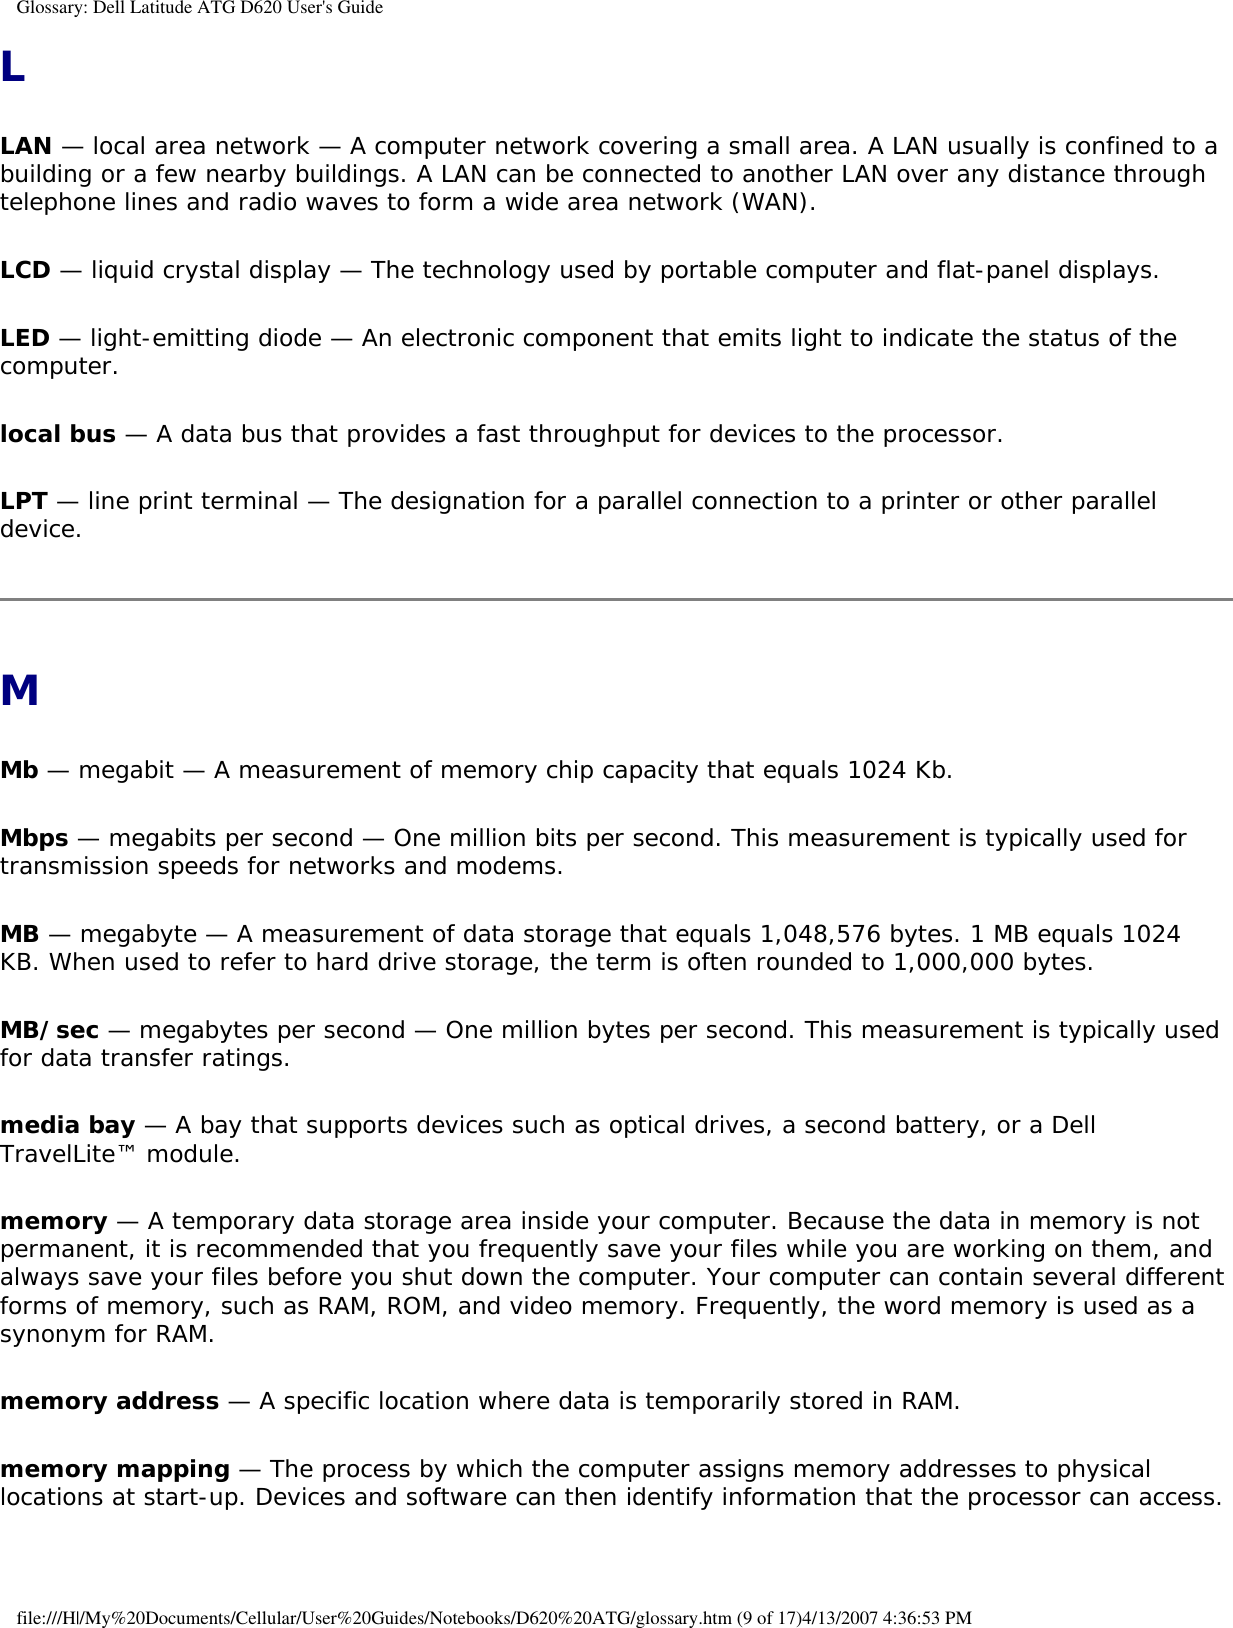 Glossary: Dell Latitude ATG D620 User&apos;s GuideLLAN — local area network — A computer network covering a small area. A LAN usually is confined to a building or a few nearby buildings. A LAN can be connected to another LAN over any distance through telephone lines and radio waves to form a wide area network (WAN).LCD — liquid crystal display — The technology used by portable computer and flat-panel displays.LED — light-emitting diode — An electronic component that emits light to indicate the status of the computer.local bus — A data bus that provides a fast throughput for devices to the processor.LPT — line print terminal — The designation for a parallel connection to a printer or other parallel device. MMb — megabit — A measurement of memory chip capacity that equals 1024 Kb.Mbps — megabits per second — One million bits per second. This measurement is typically used for transmission speeds for networks and modems.MB — megabyte — A measurement of data storage that equals 1,048,576 bytes. 1 MB equals 1024 KB. When used to refer to hard drive storage, the term is often rounded to 1,000,000 bytes.MB/sec — megabytes per second — One million bytes per second. This measurement is typically used for data transfer ratings.media bay — A bay that supports devices such as optical drives, a second battery, or a Dell TravelLite™ module.memory — A temporary data storage area inside your computer. Because the data in memory is not permanent, it is recommended that you frequently save your files while you are working on them, and always save your files before you shut down the computer. Your computer can contain several different forms of memory, such as RAM, ROM, and video memory. Frequently, the word memory is used as a synonym for RAM.memory address — A specific location where data is temporarily stored in RAM.memory mapping — The process by which the computer assigns memory addresses to physical locations at start-up. Devices and software can then identify information that the processor can access.file:///H|/My%20Documents/Cellular/User%20Guides/Notebooks/D620%20ATG/glossary.htm (9 of 17)4/13/2007 4:36:53 PM